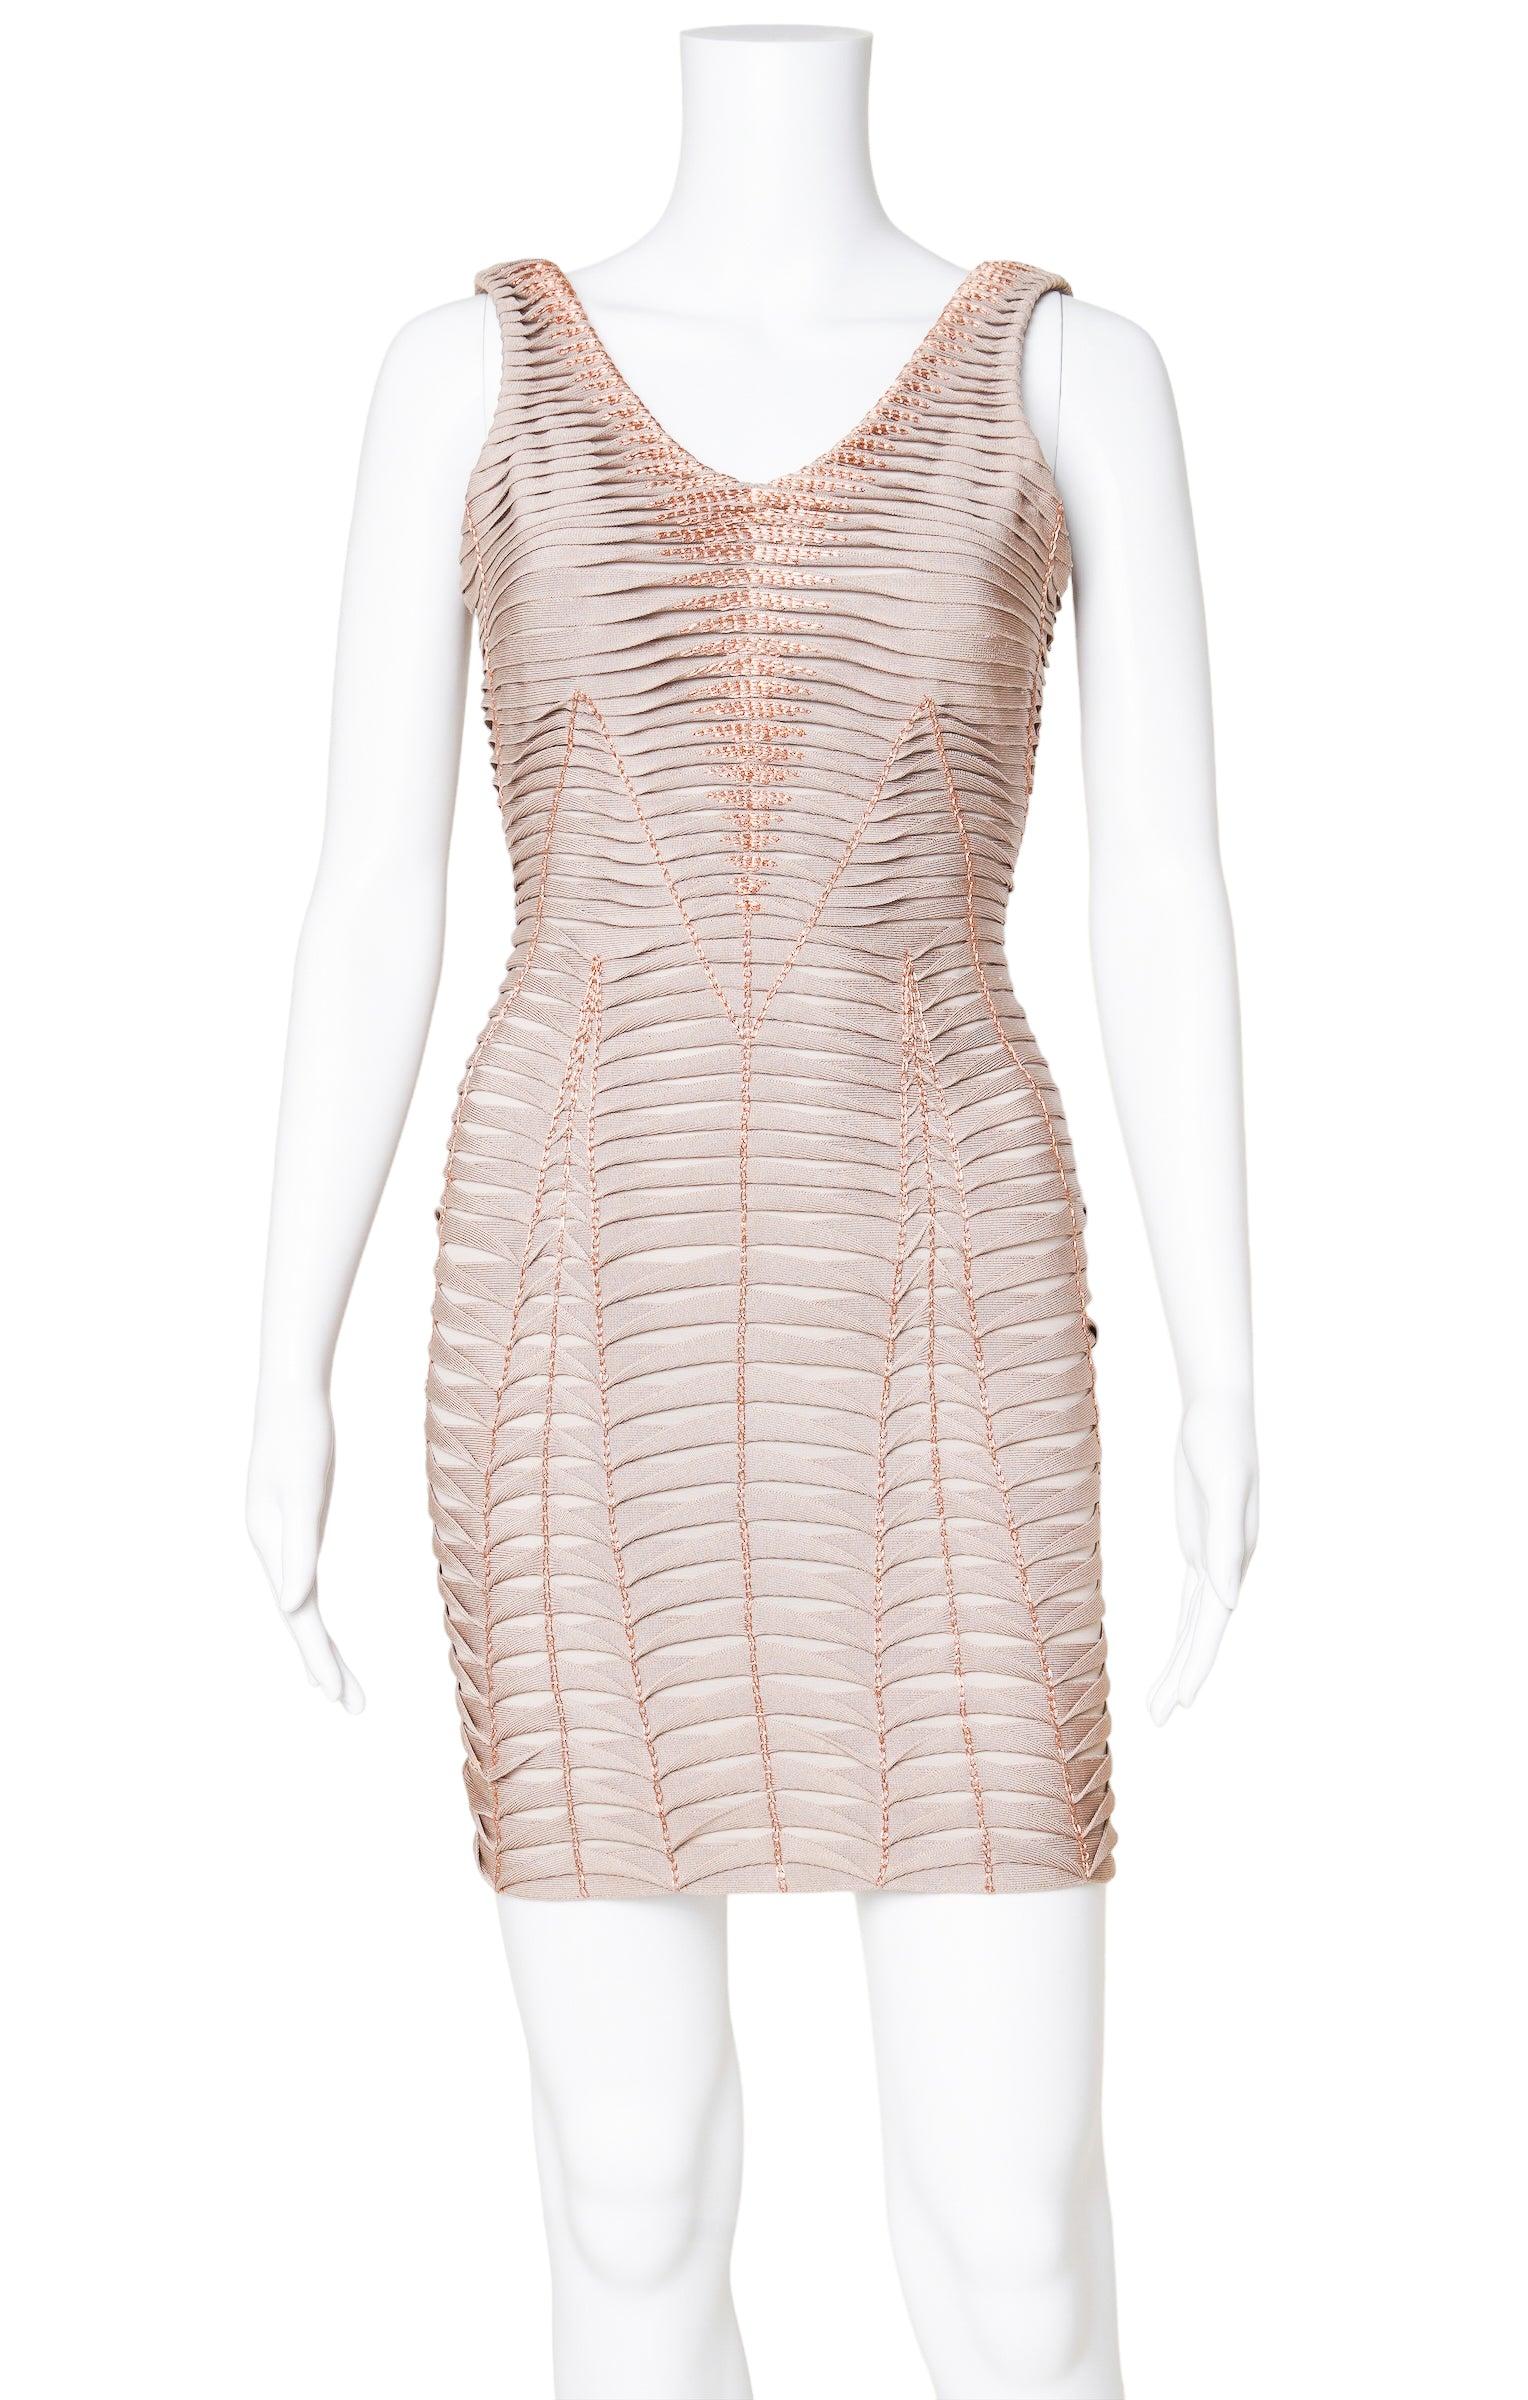 How To Buy Herve Leger